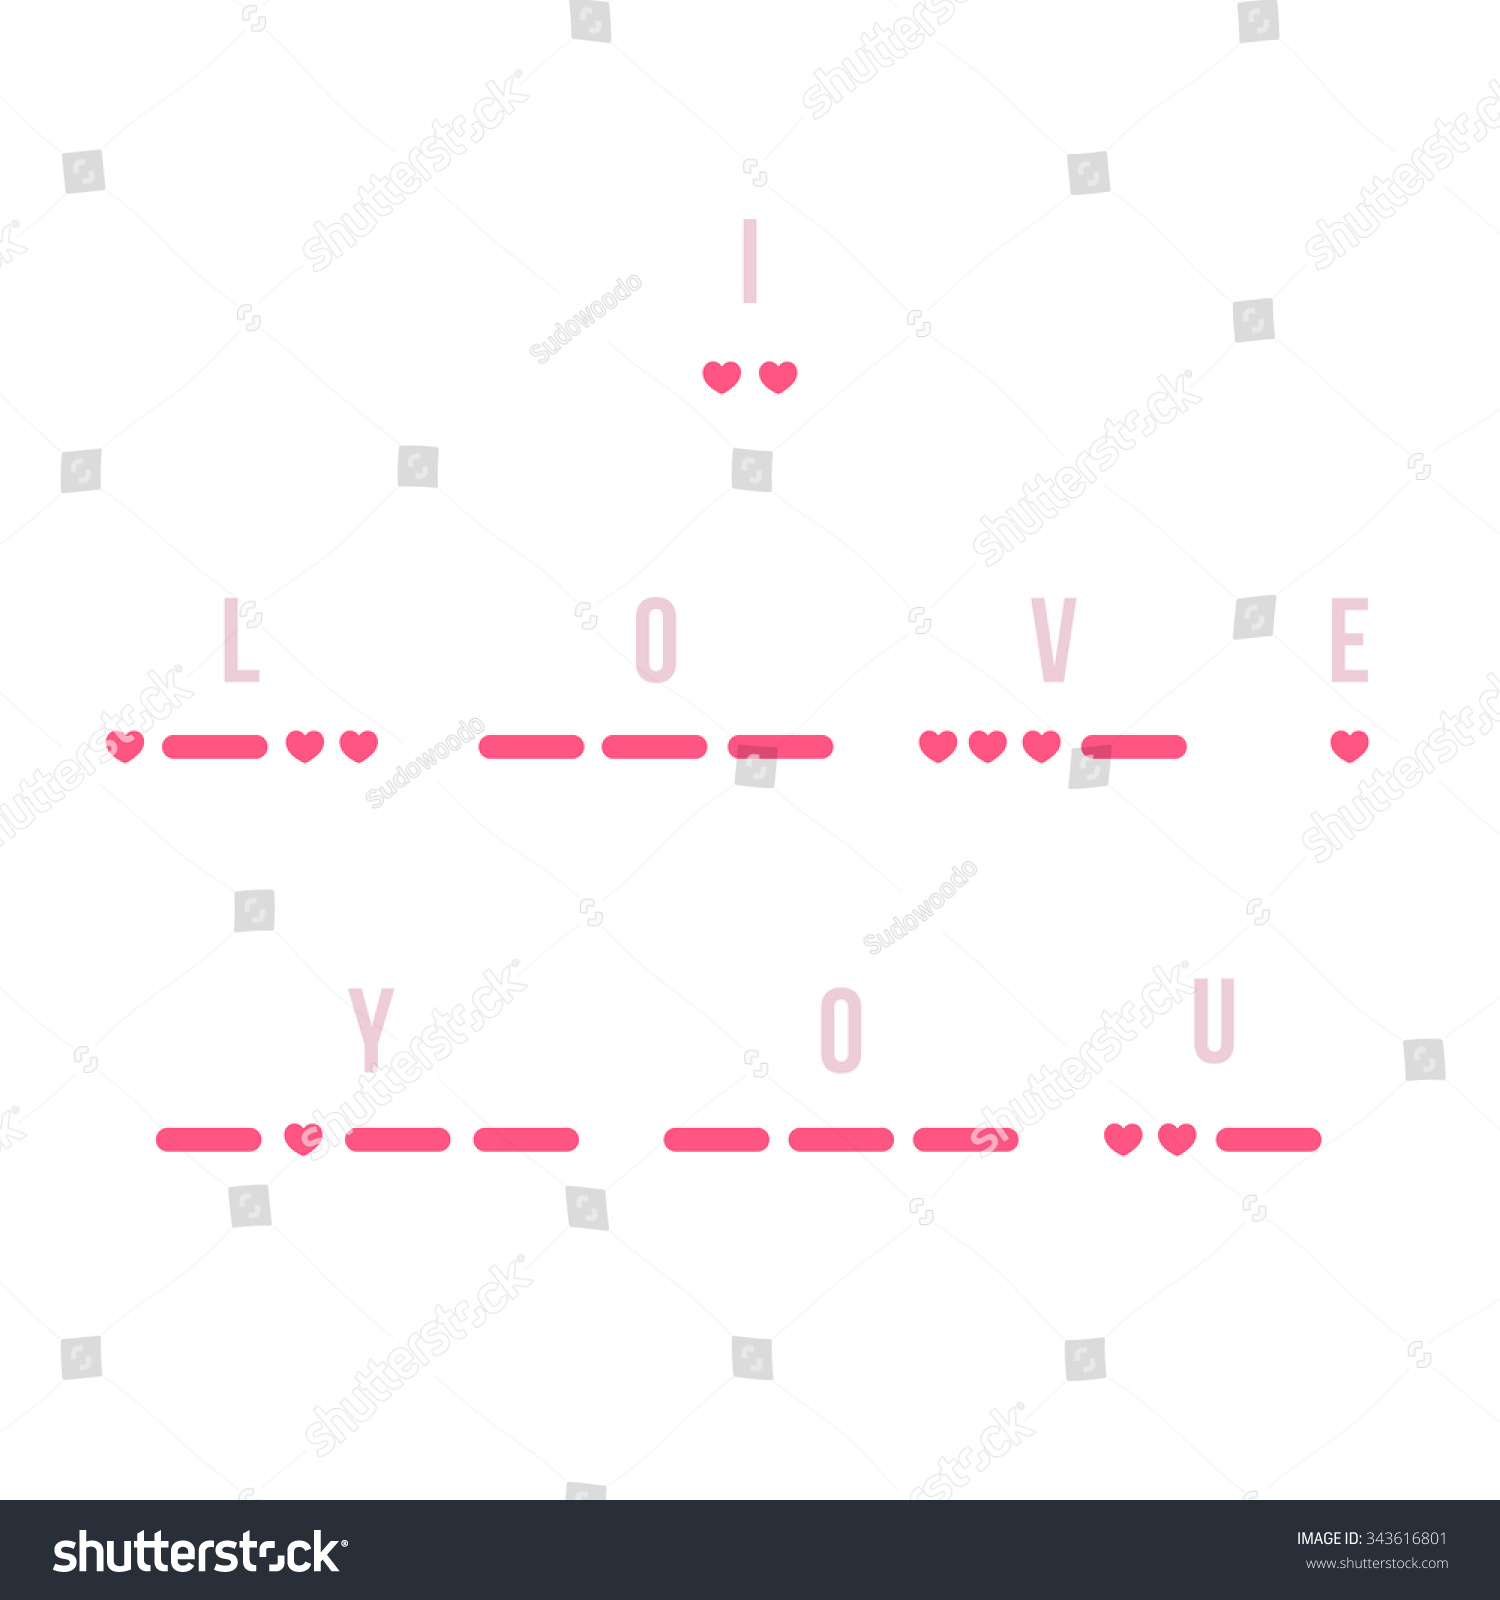 What is the code of i love you?